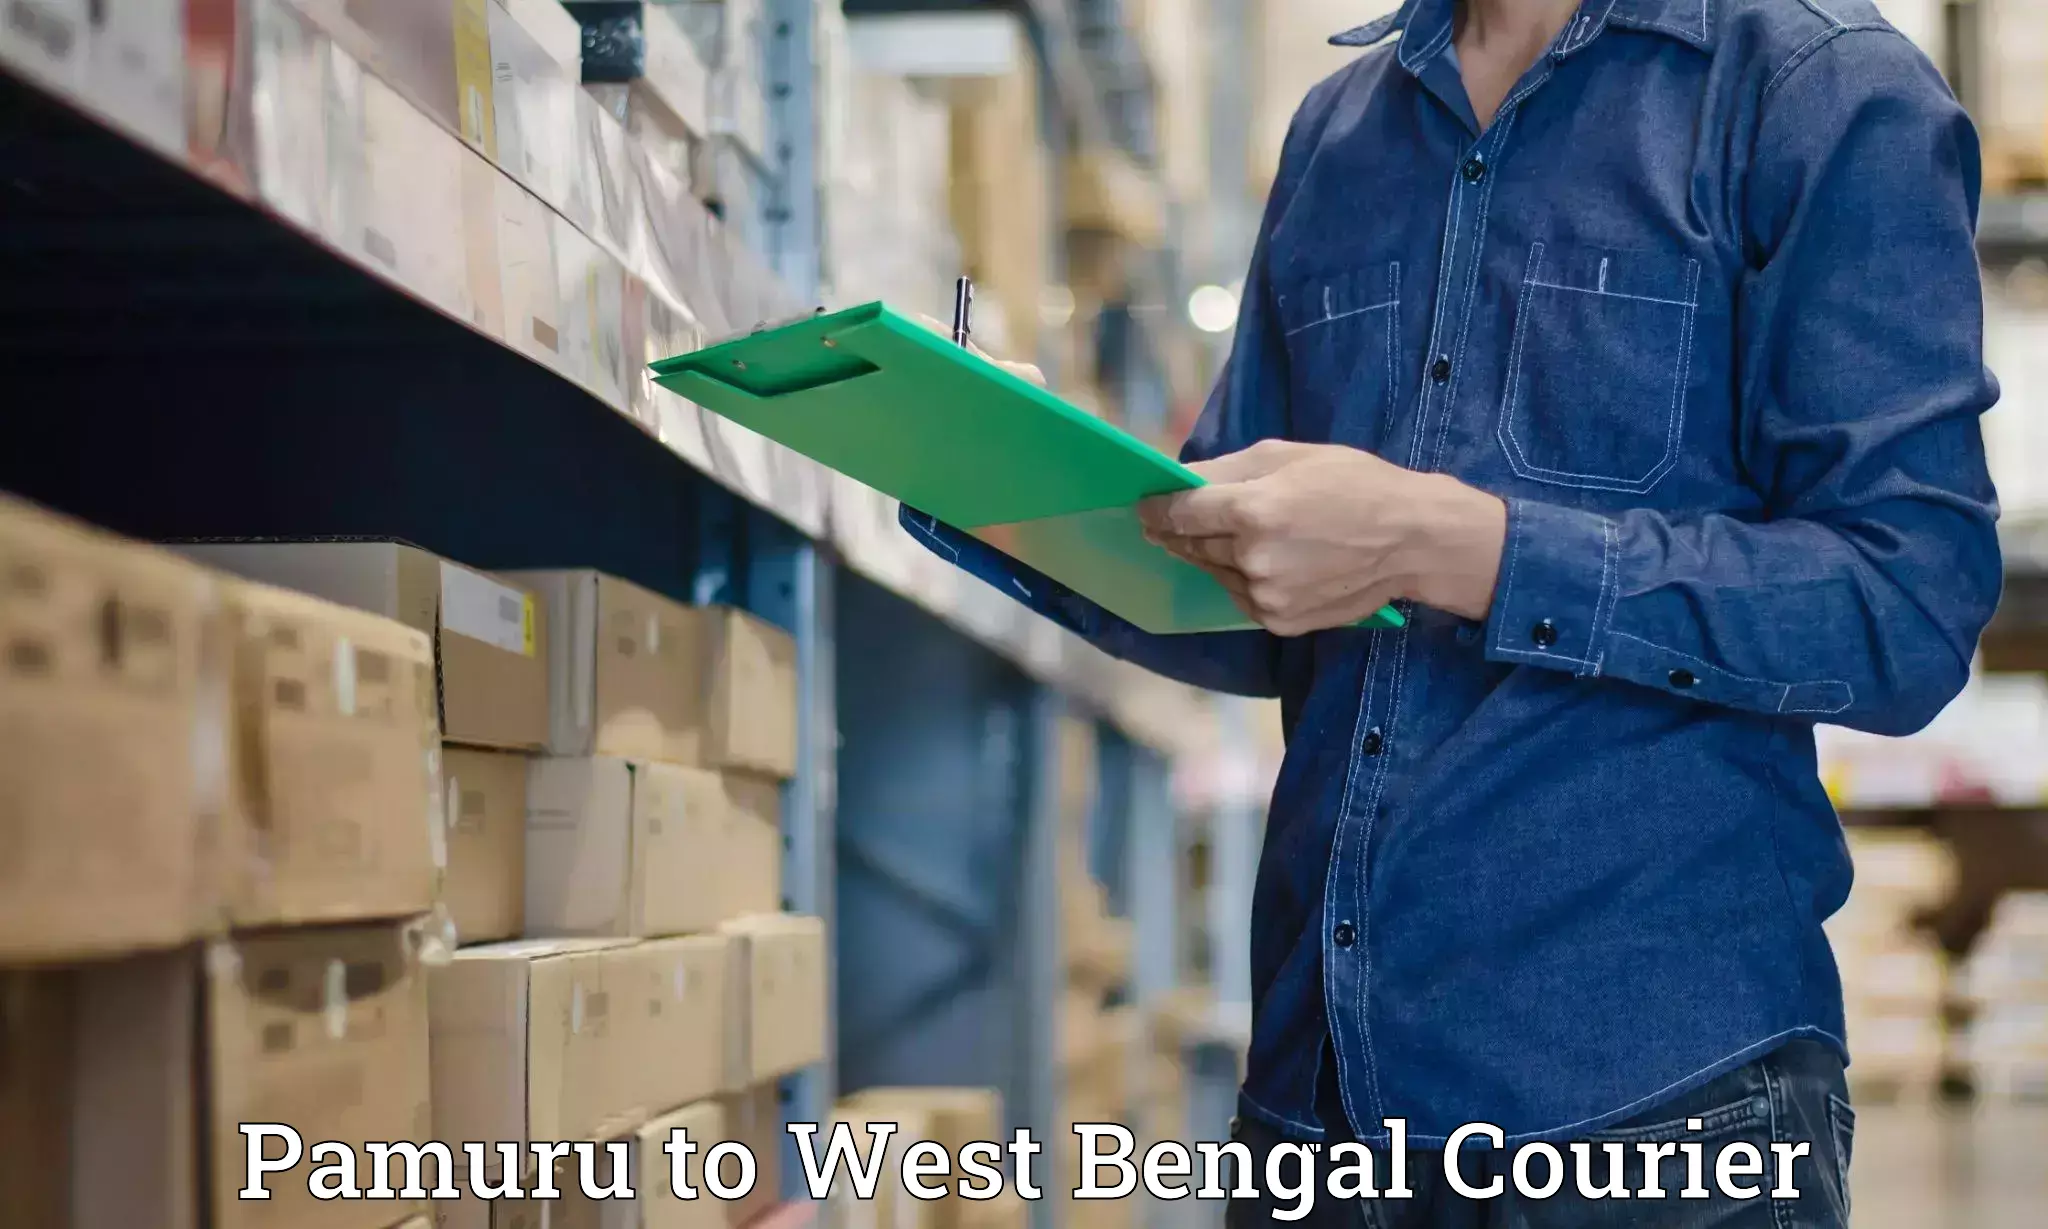 Courier service booking Pamuru to West Bengal